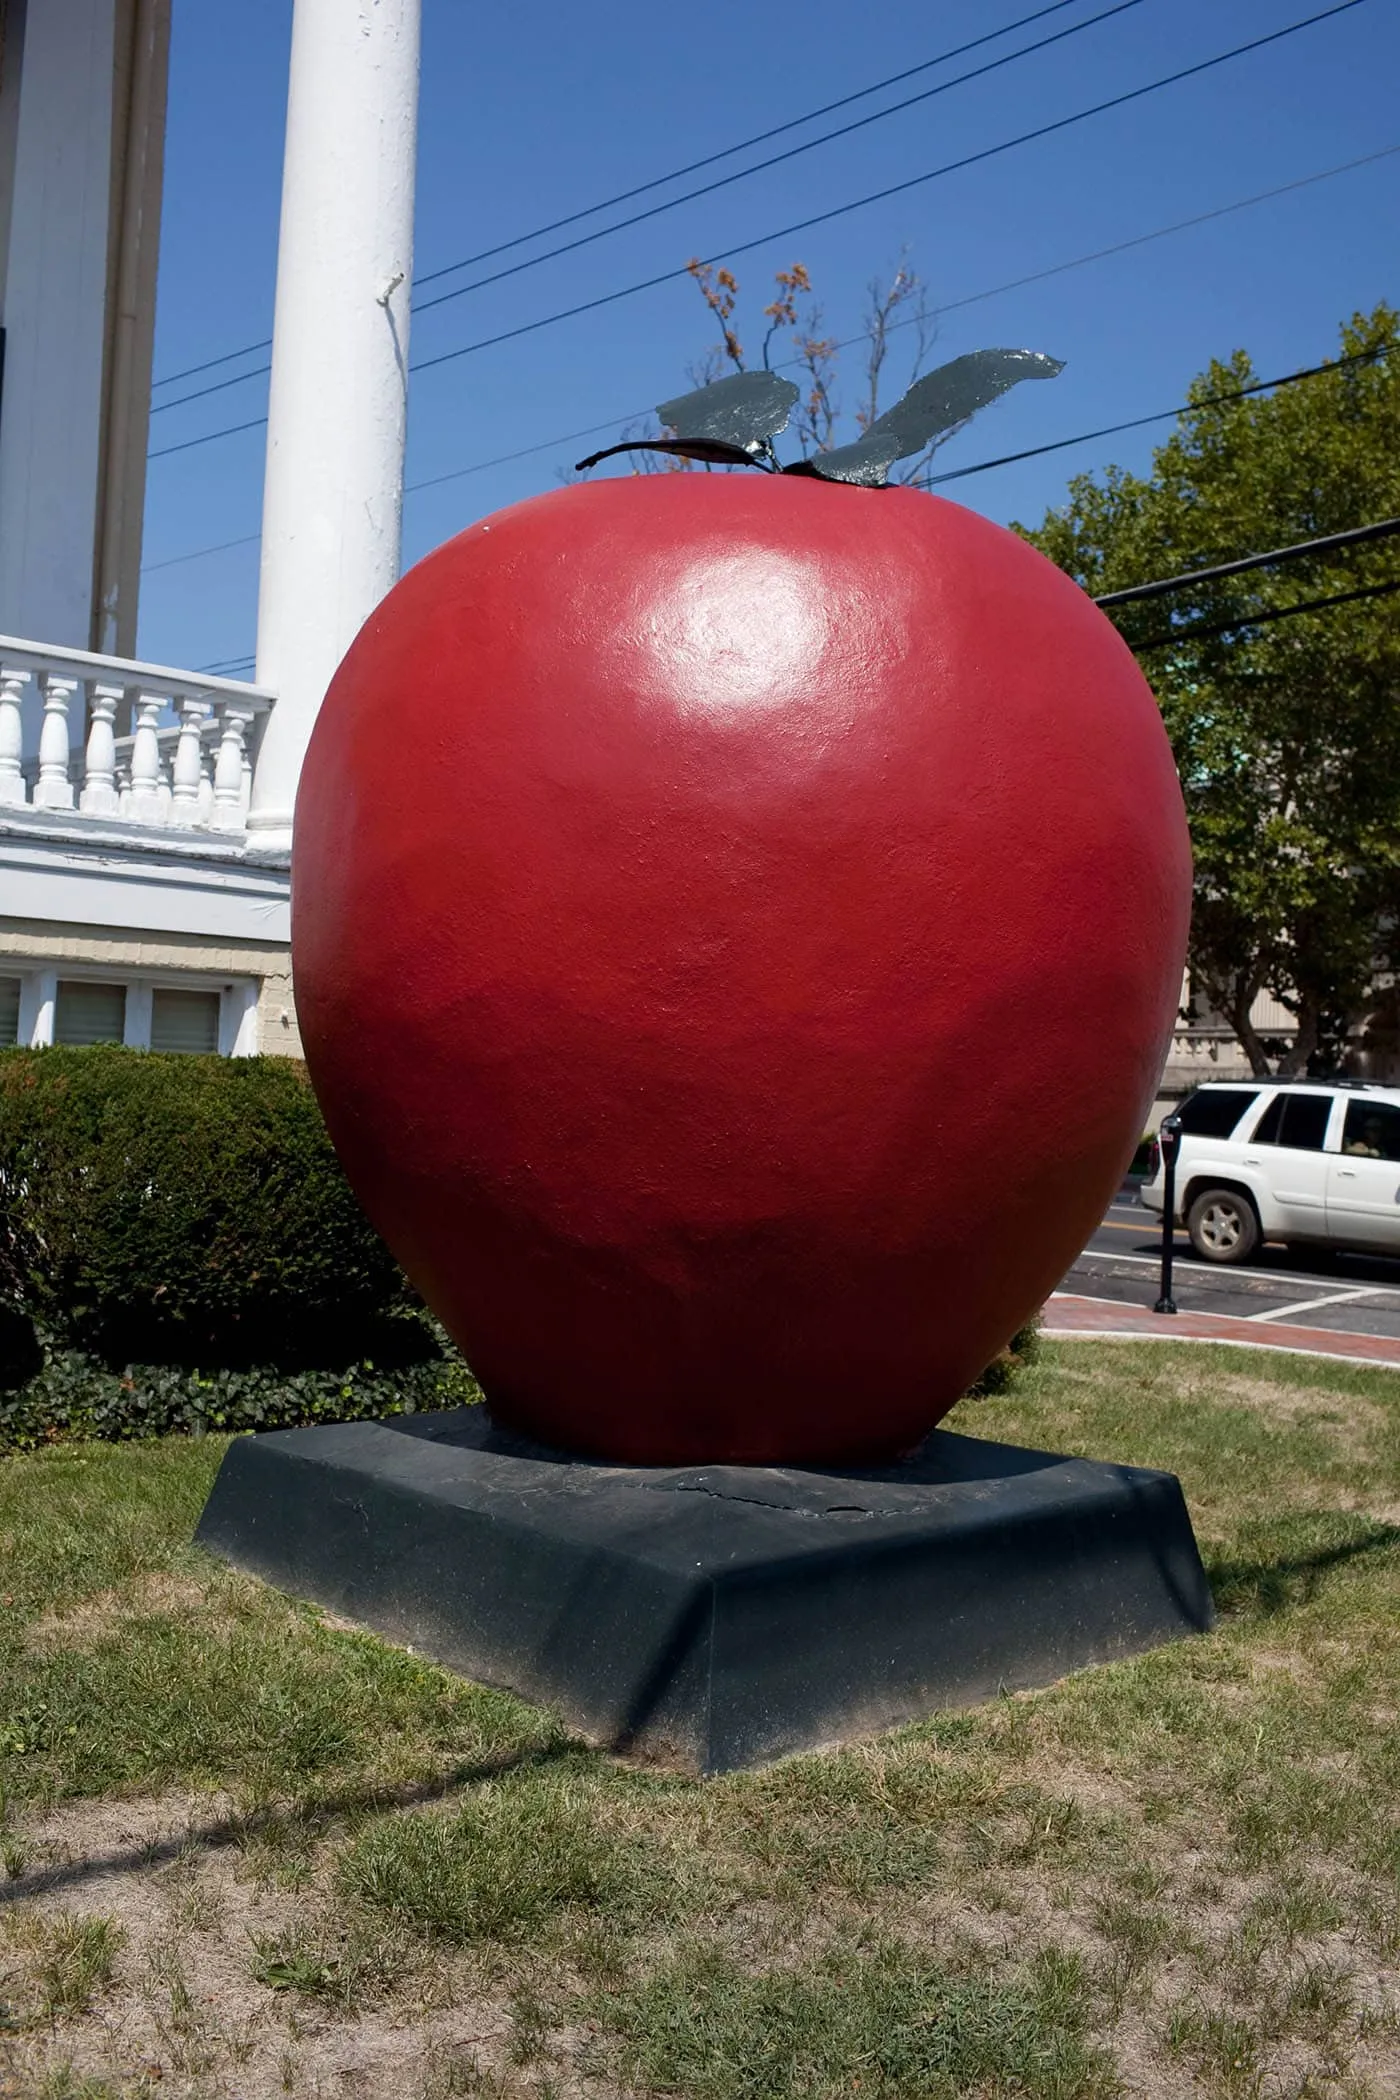 The World's Largest Apple in Winchester, Virginia - Roadside attractions in Virginia